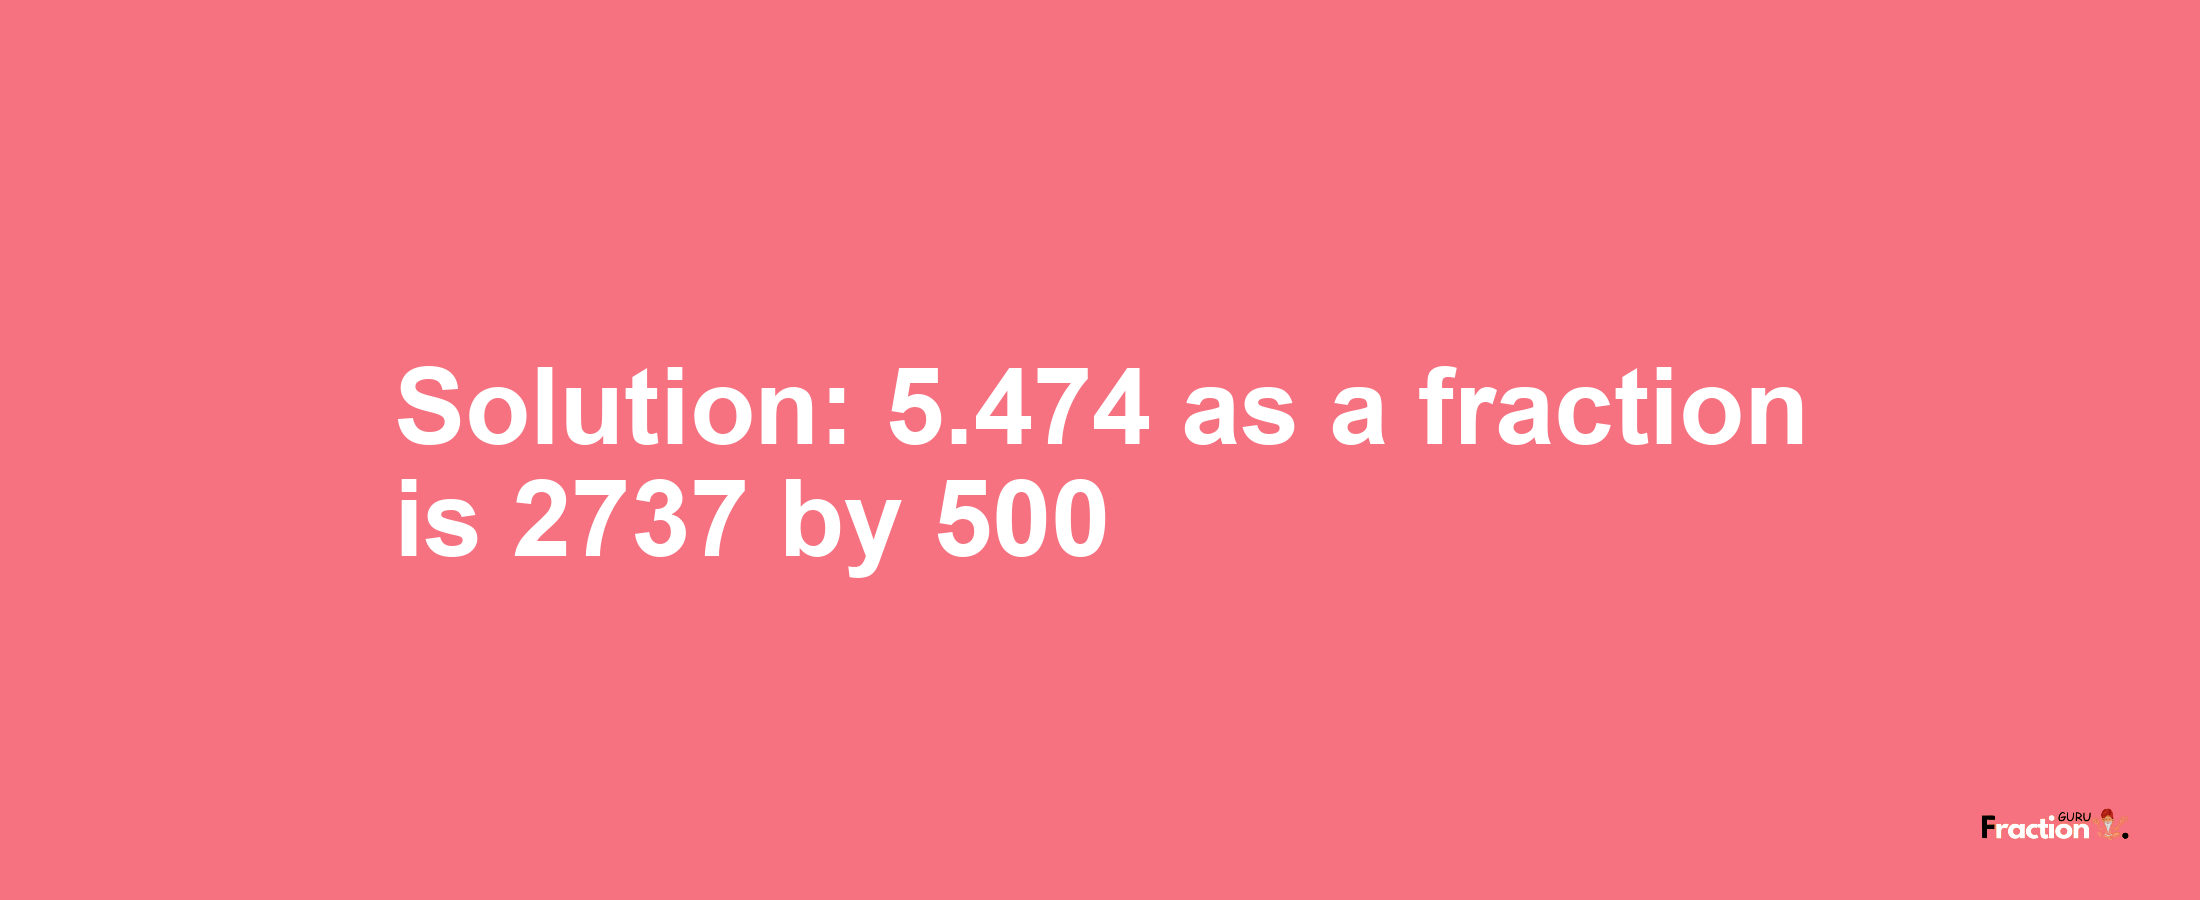 Solution:5.474 as a fraction is 2737/500